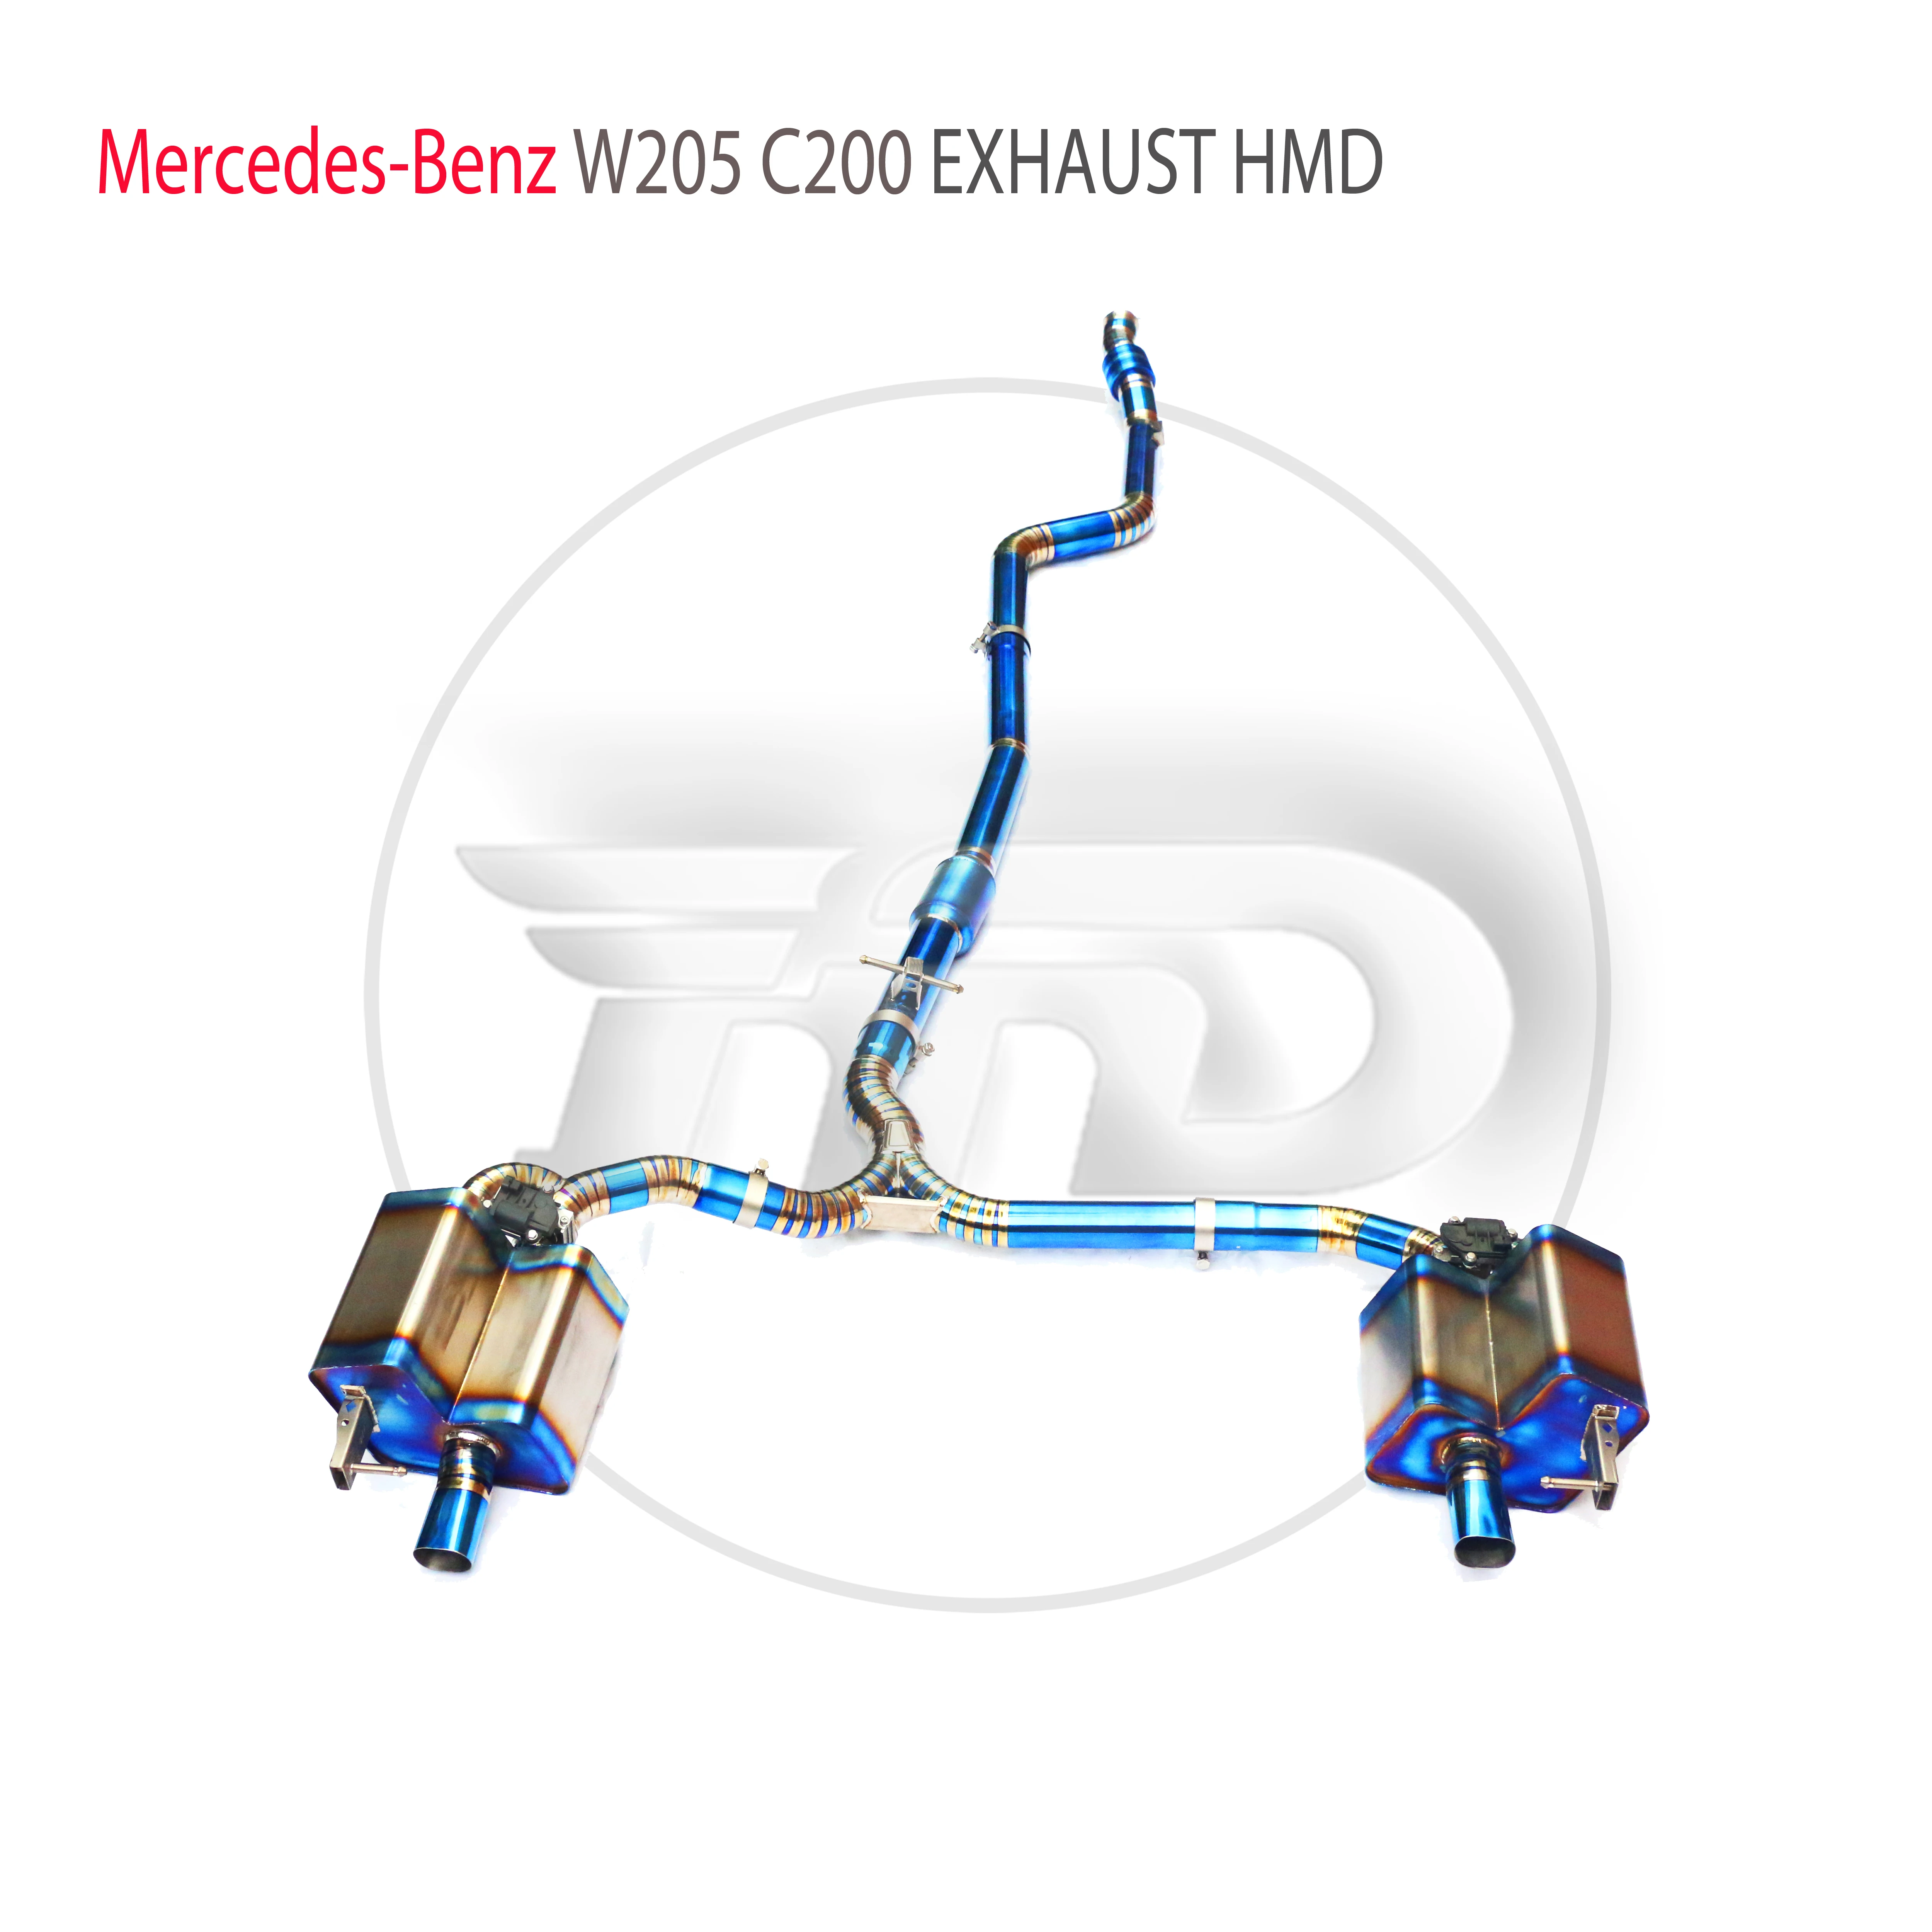 

HMD Exhaust System Titanium Or Stainless Steel Performance Catback is Suitable for Mercedes Benz W205 C180 C200 C250 C260 C300